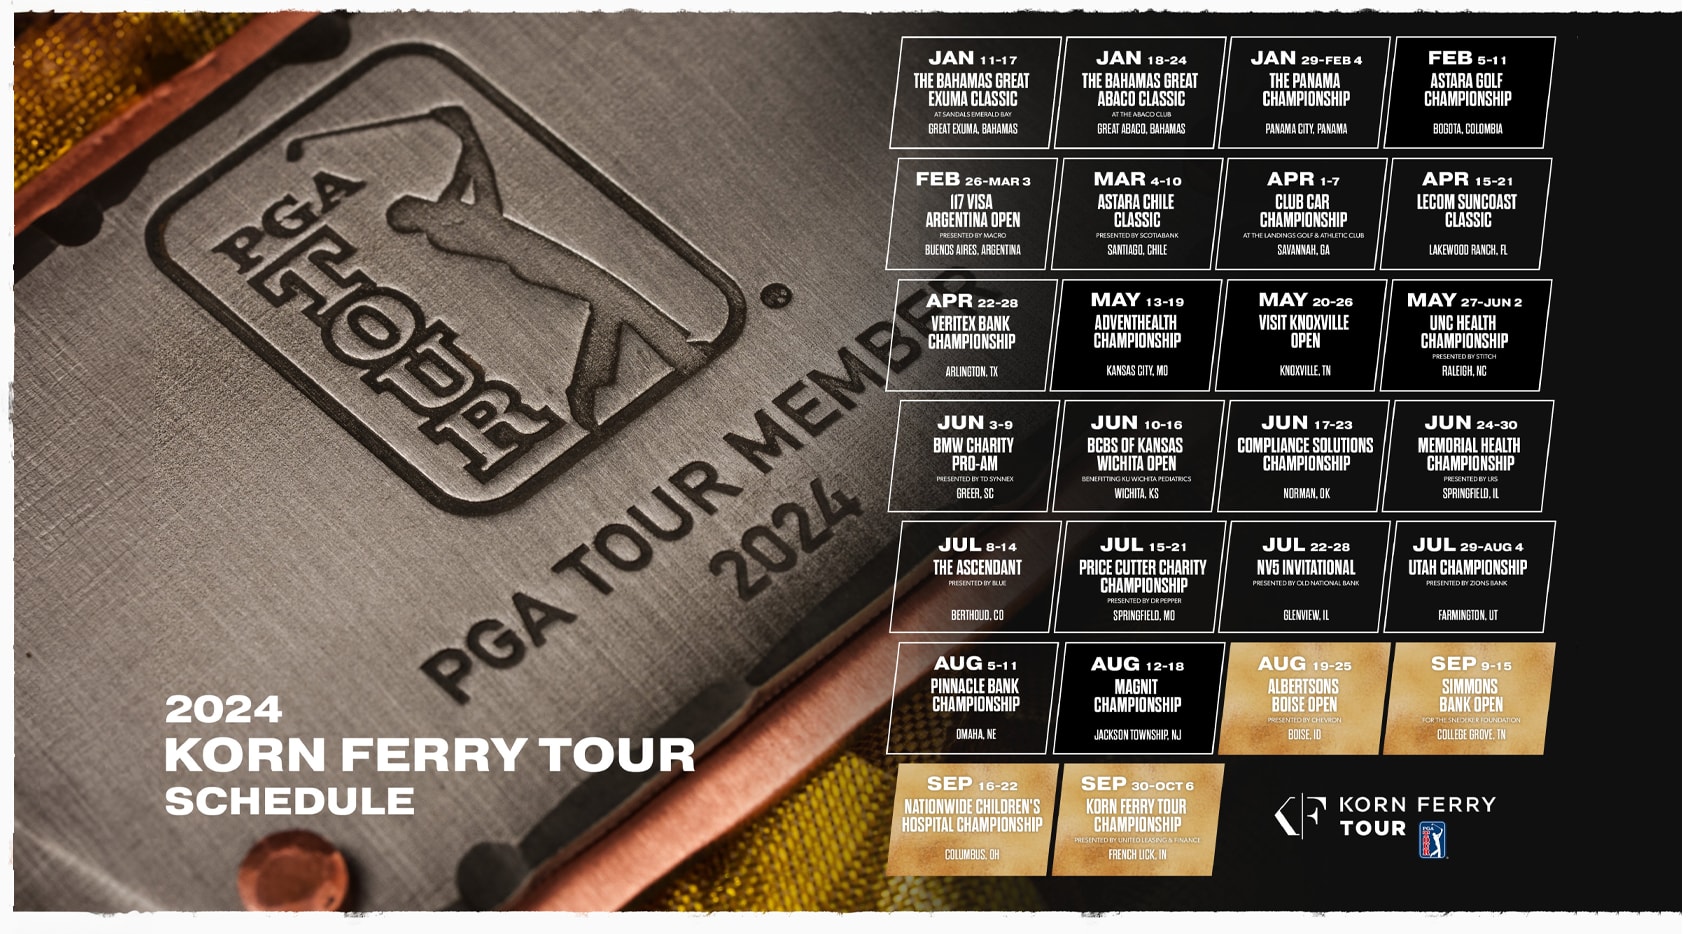 Korn Ferry Tour 2024 Schedule Plan Your Tournament Strategy Now